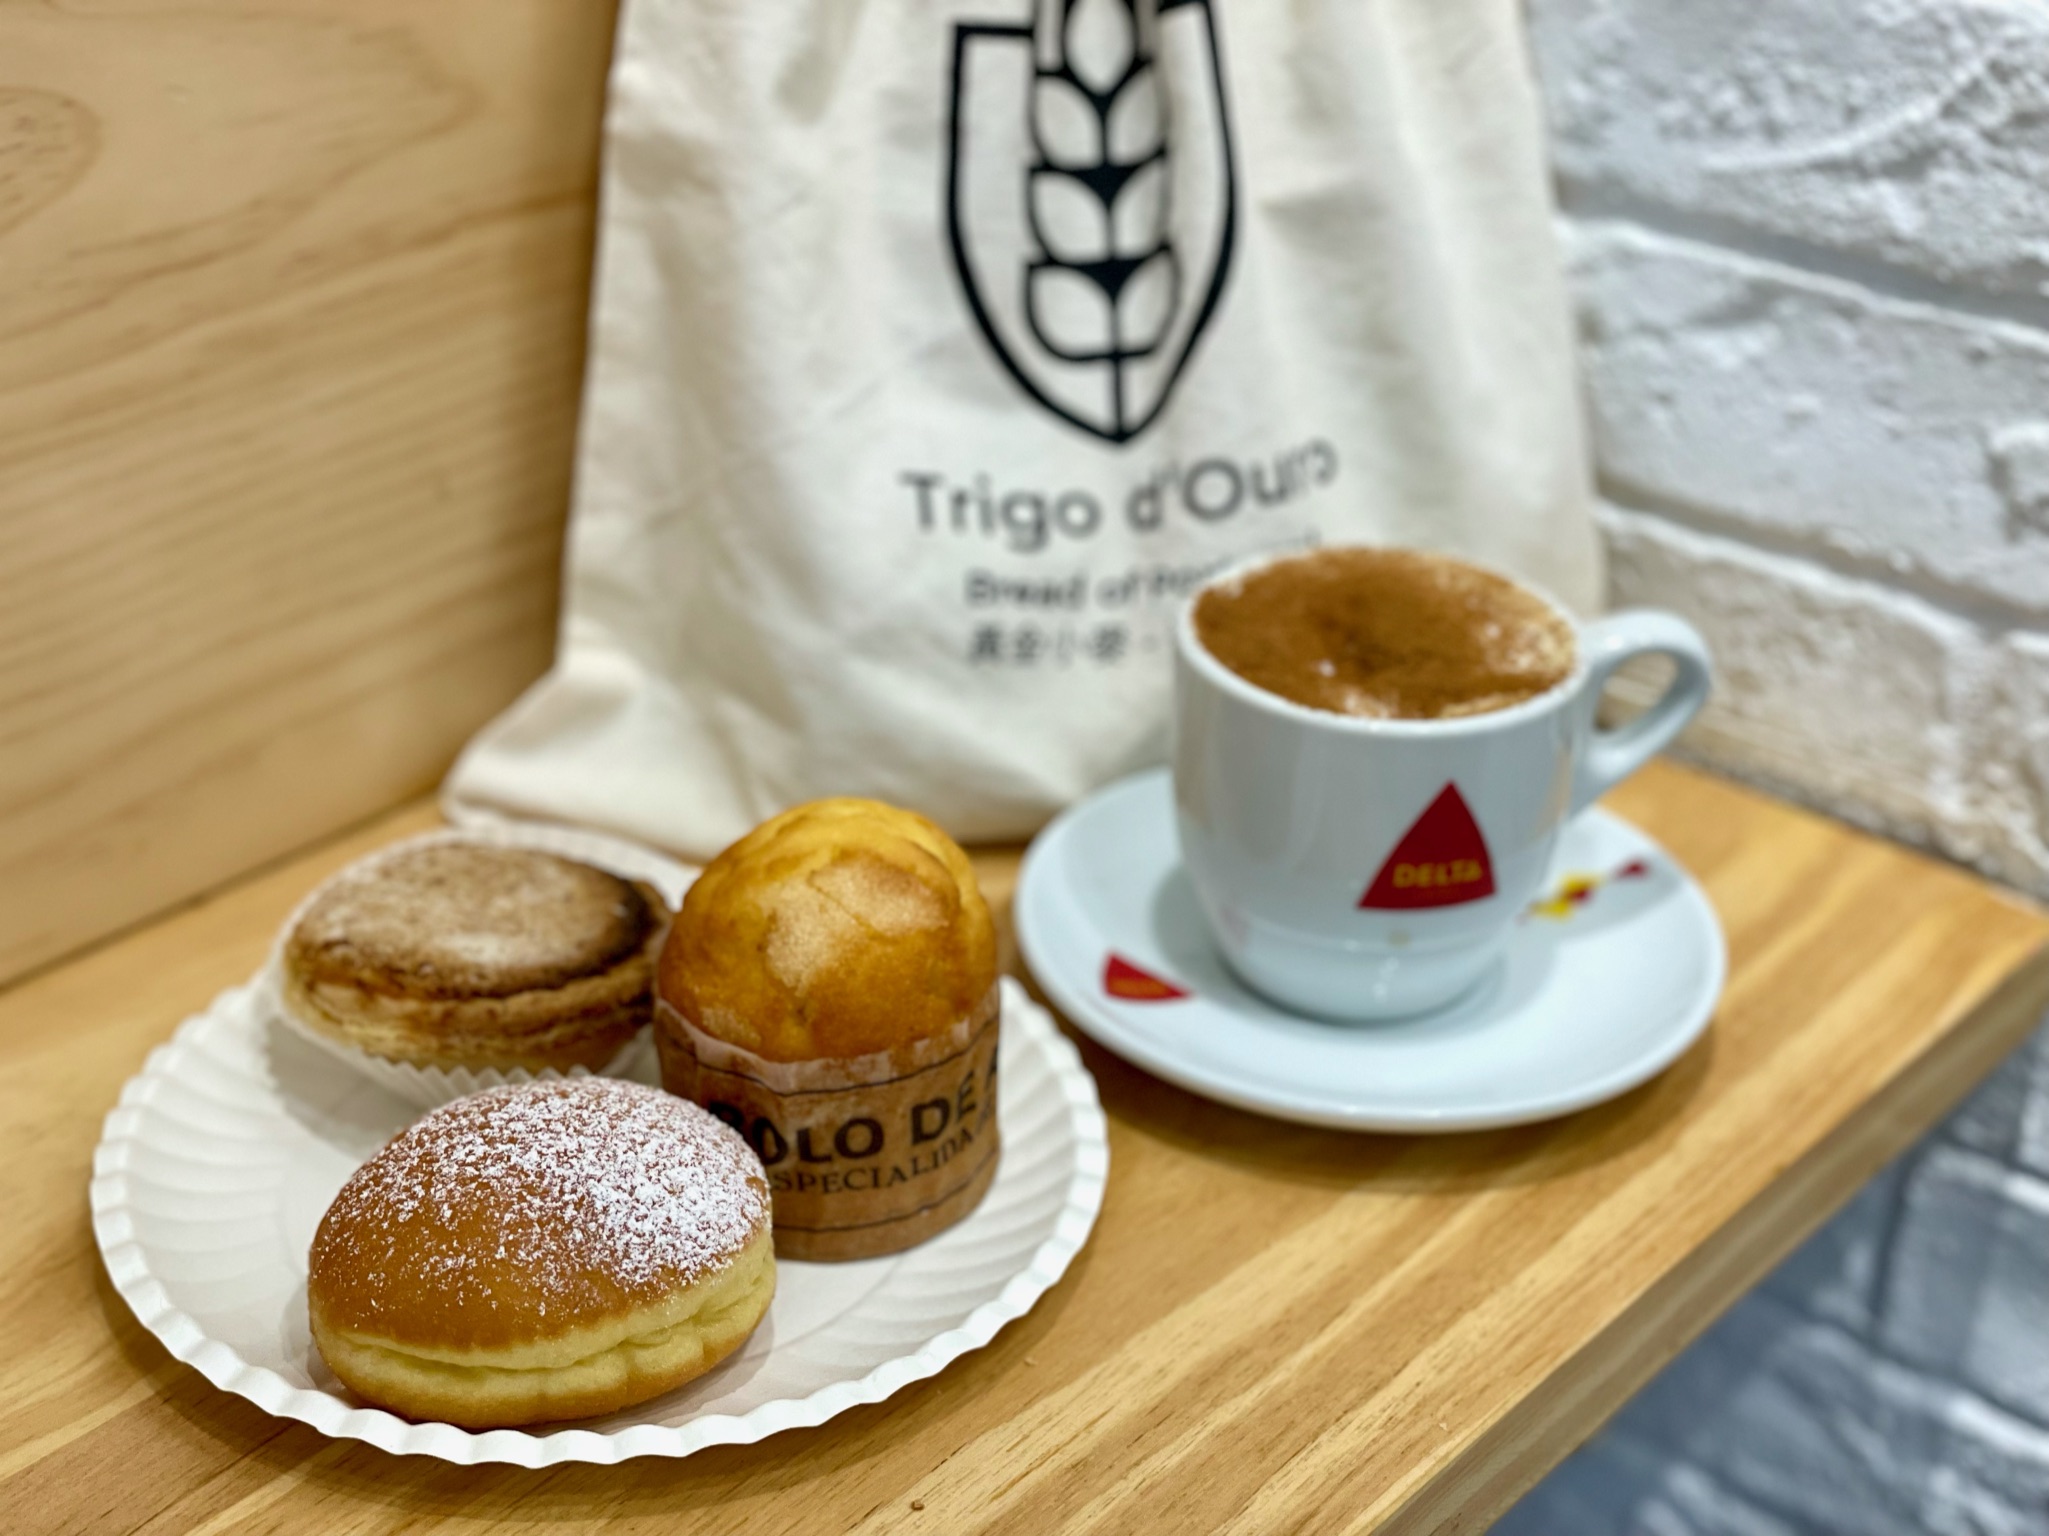 Selection of Pastries at Trigo DOuro with Bag in the Background Macau Lifestyle